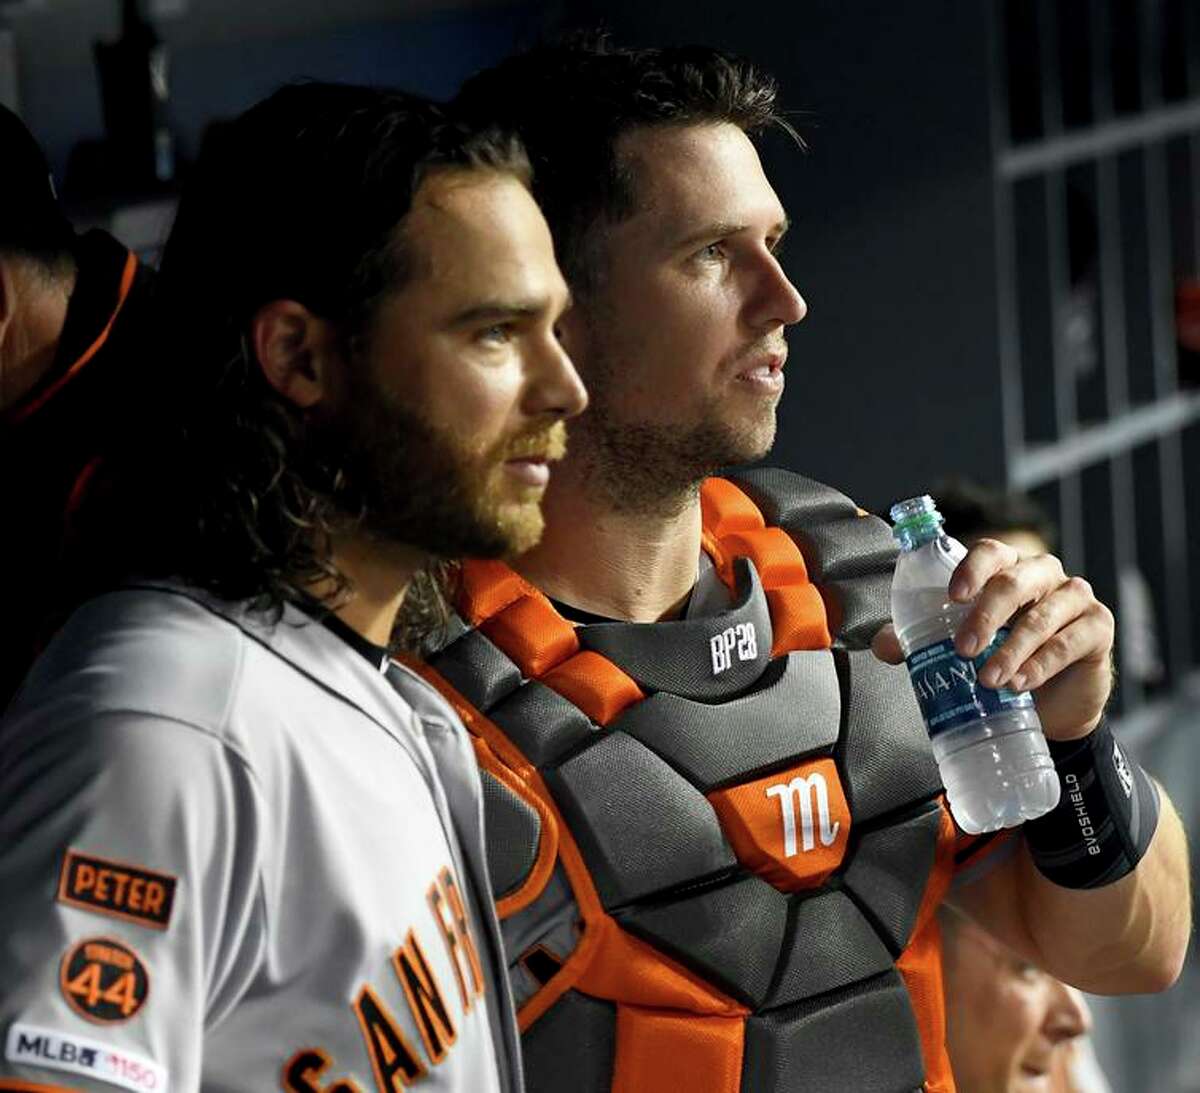 Brandon Crawford (left) and Buster Posey were both drafted by the Giants in 2008.